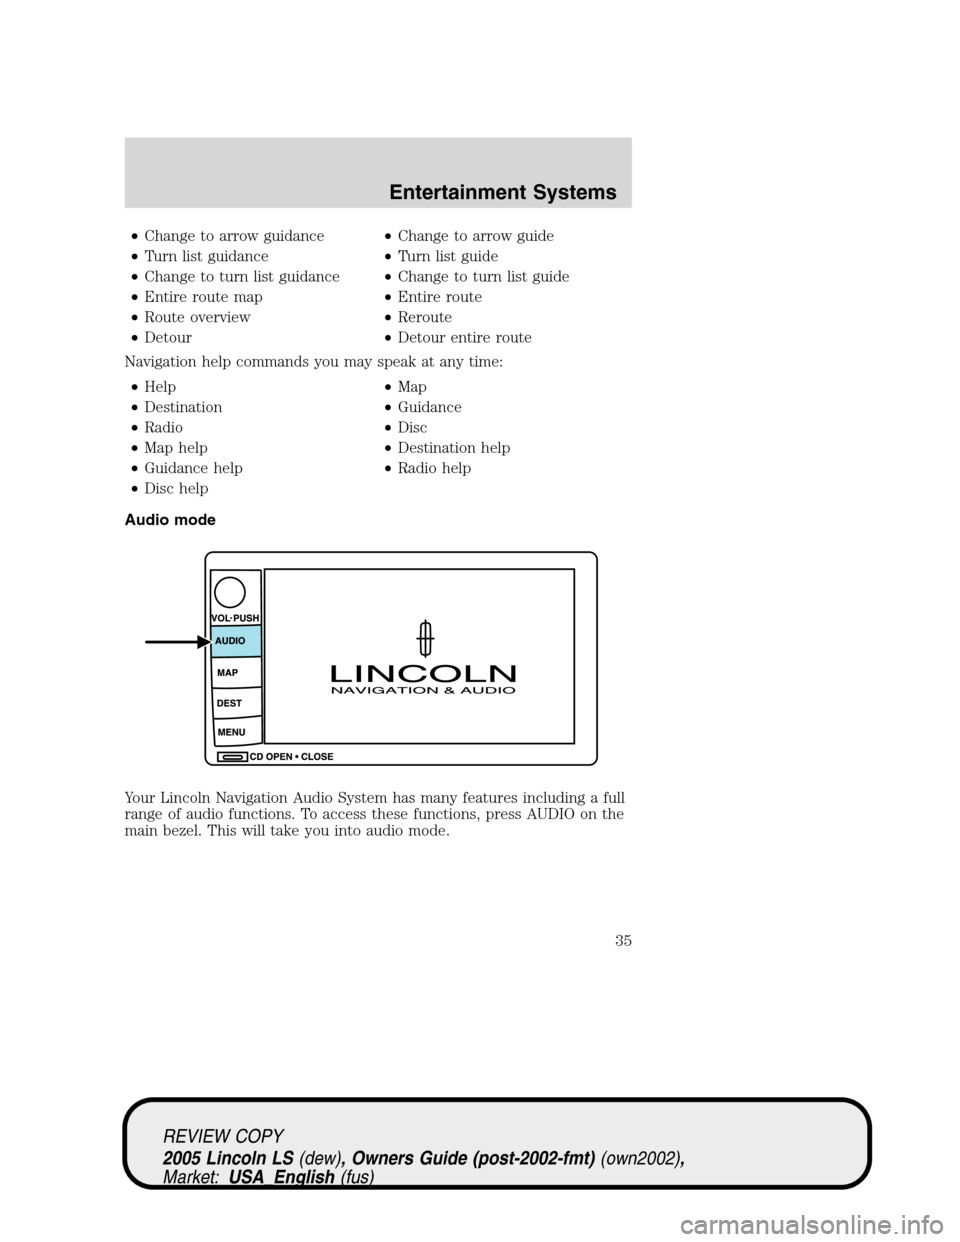 LINCOLN LS 2005 Owners Guide •Change to arrow guidance•Change to arrow guide
•Turn list guidance•Turn list guide
•Change to turn list guidance•Change to turn list guide
•Entire route map•Entire route
•Route over